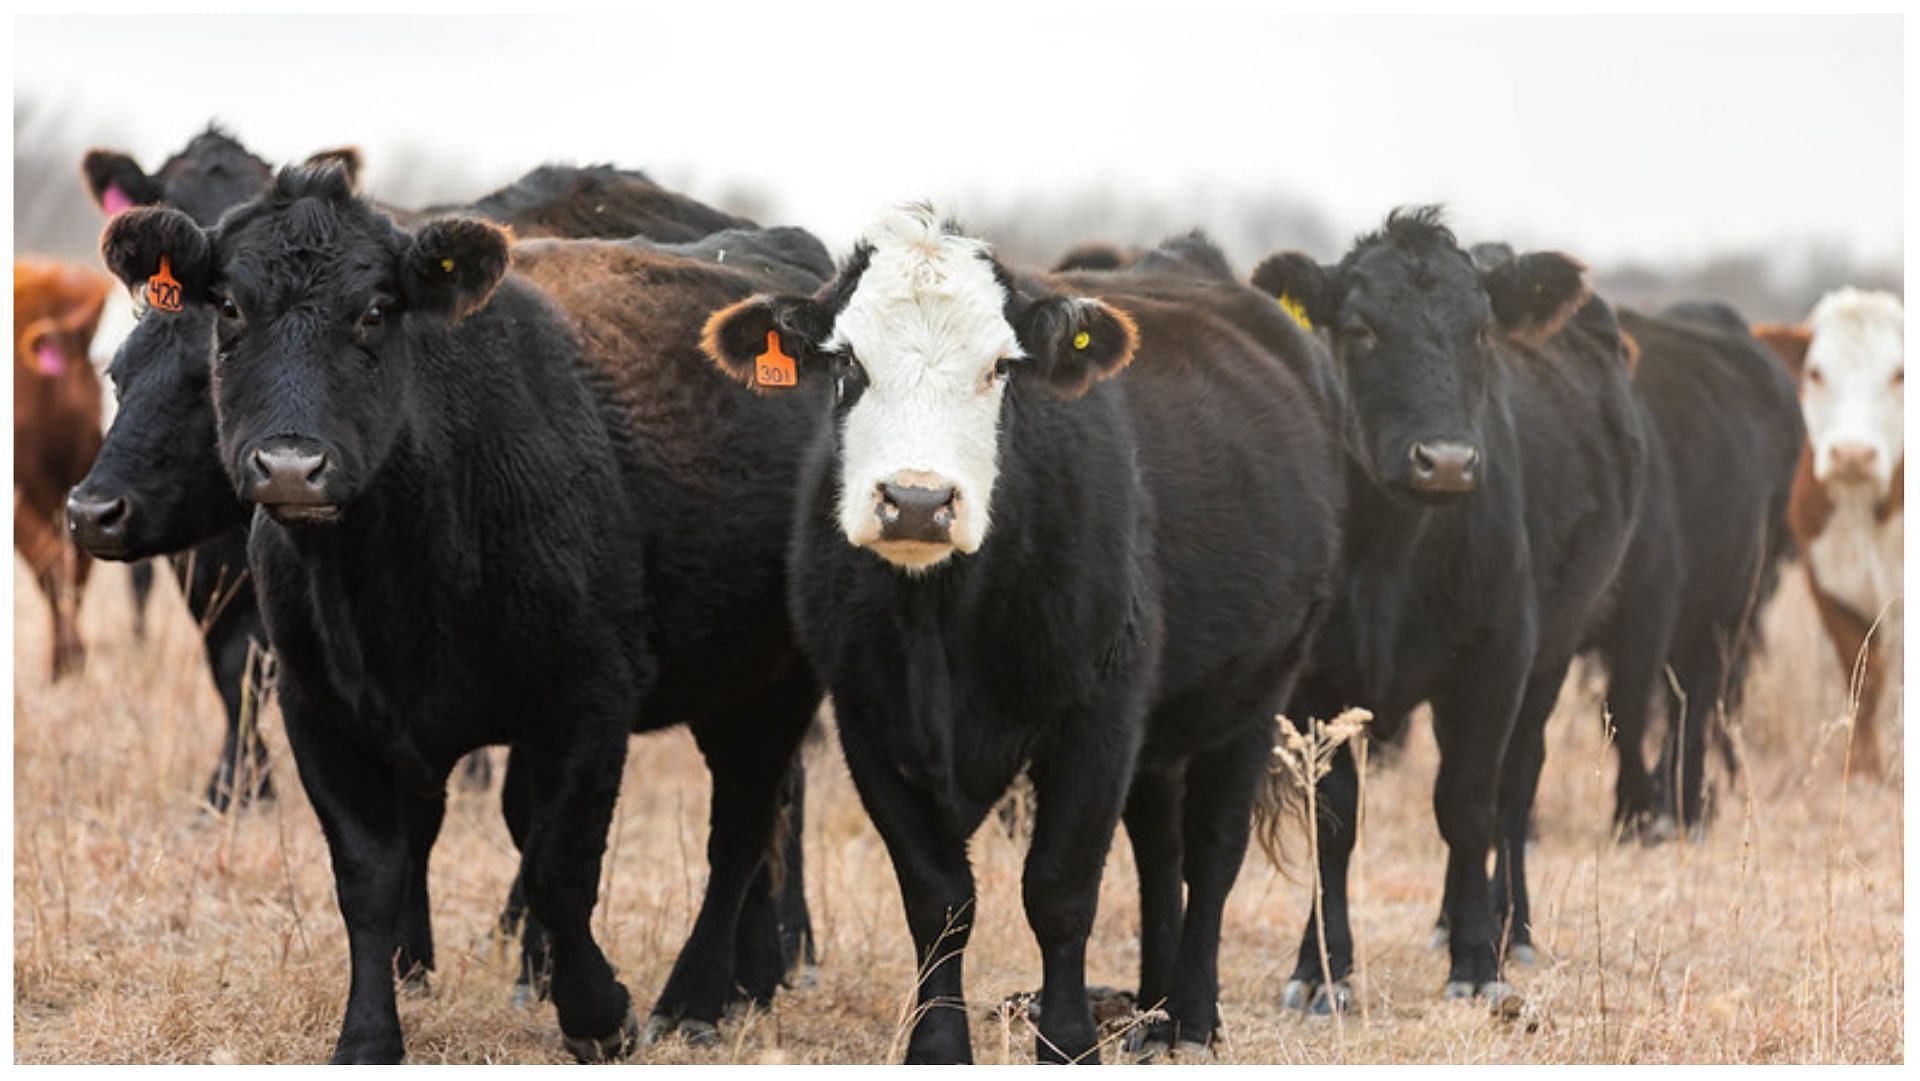 Beef suppliers are using harmful antibiotics in food sources! (Image via Beef Cattle Institute)